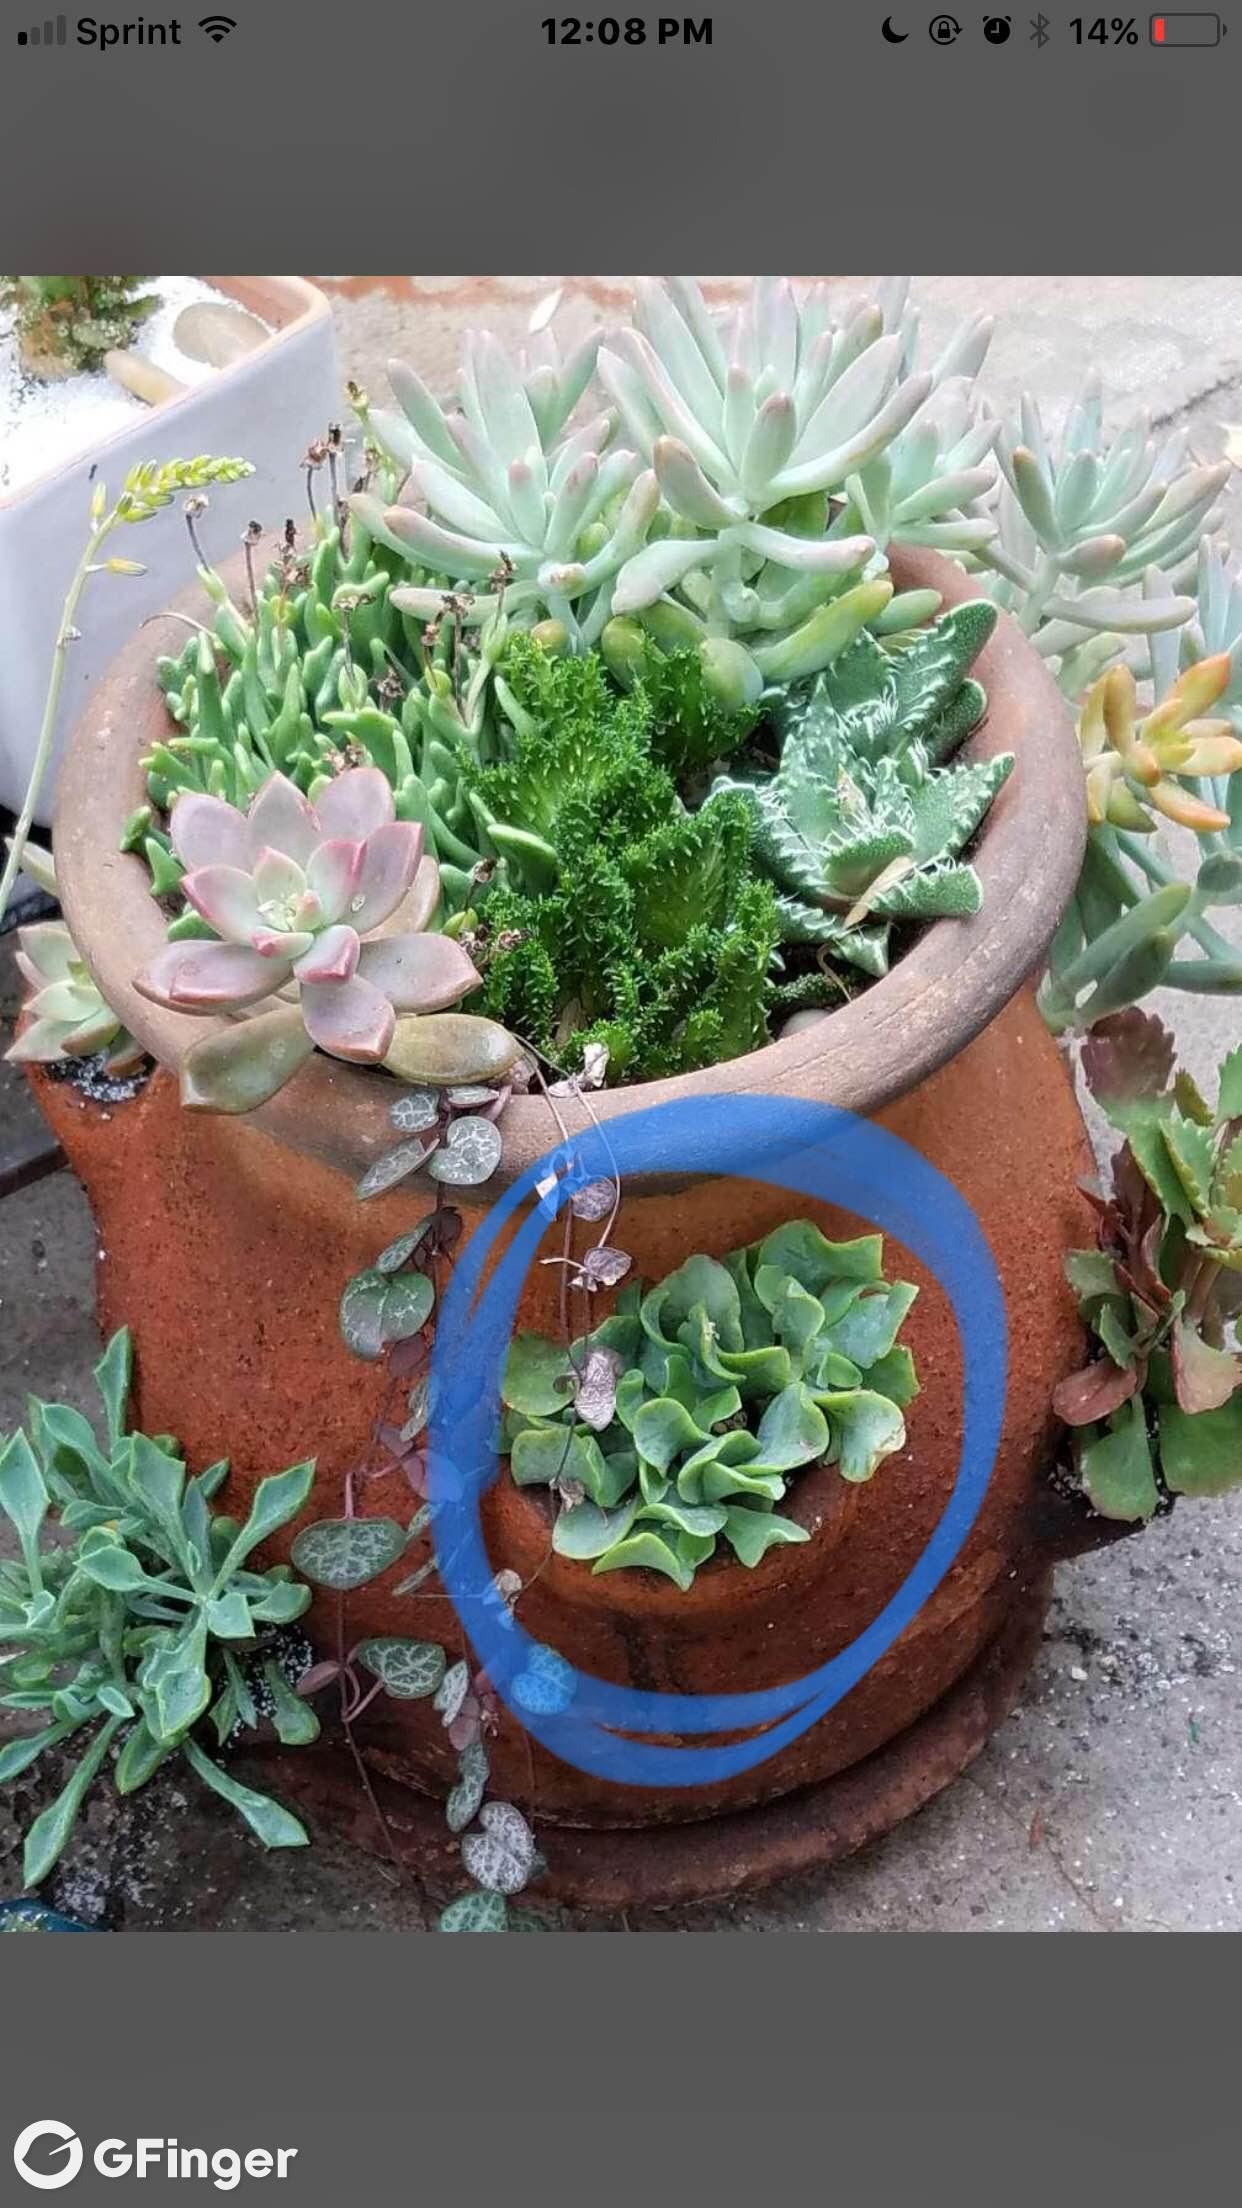 What is the name/species of this plant ? i screenshotted yours & circled it in blue 🙂